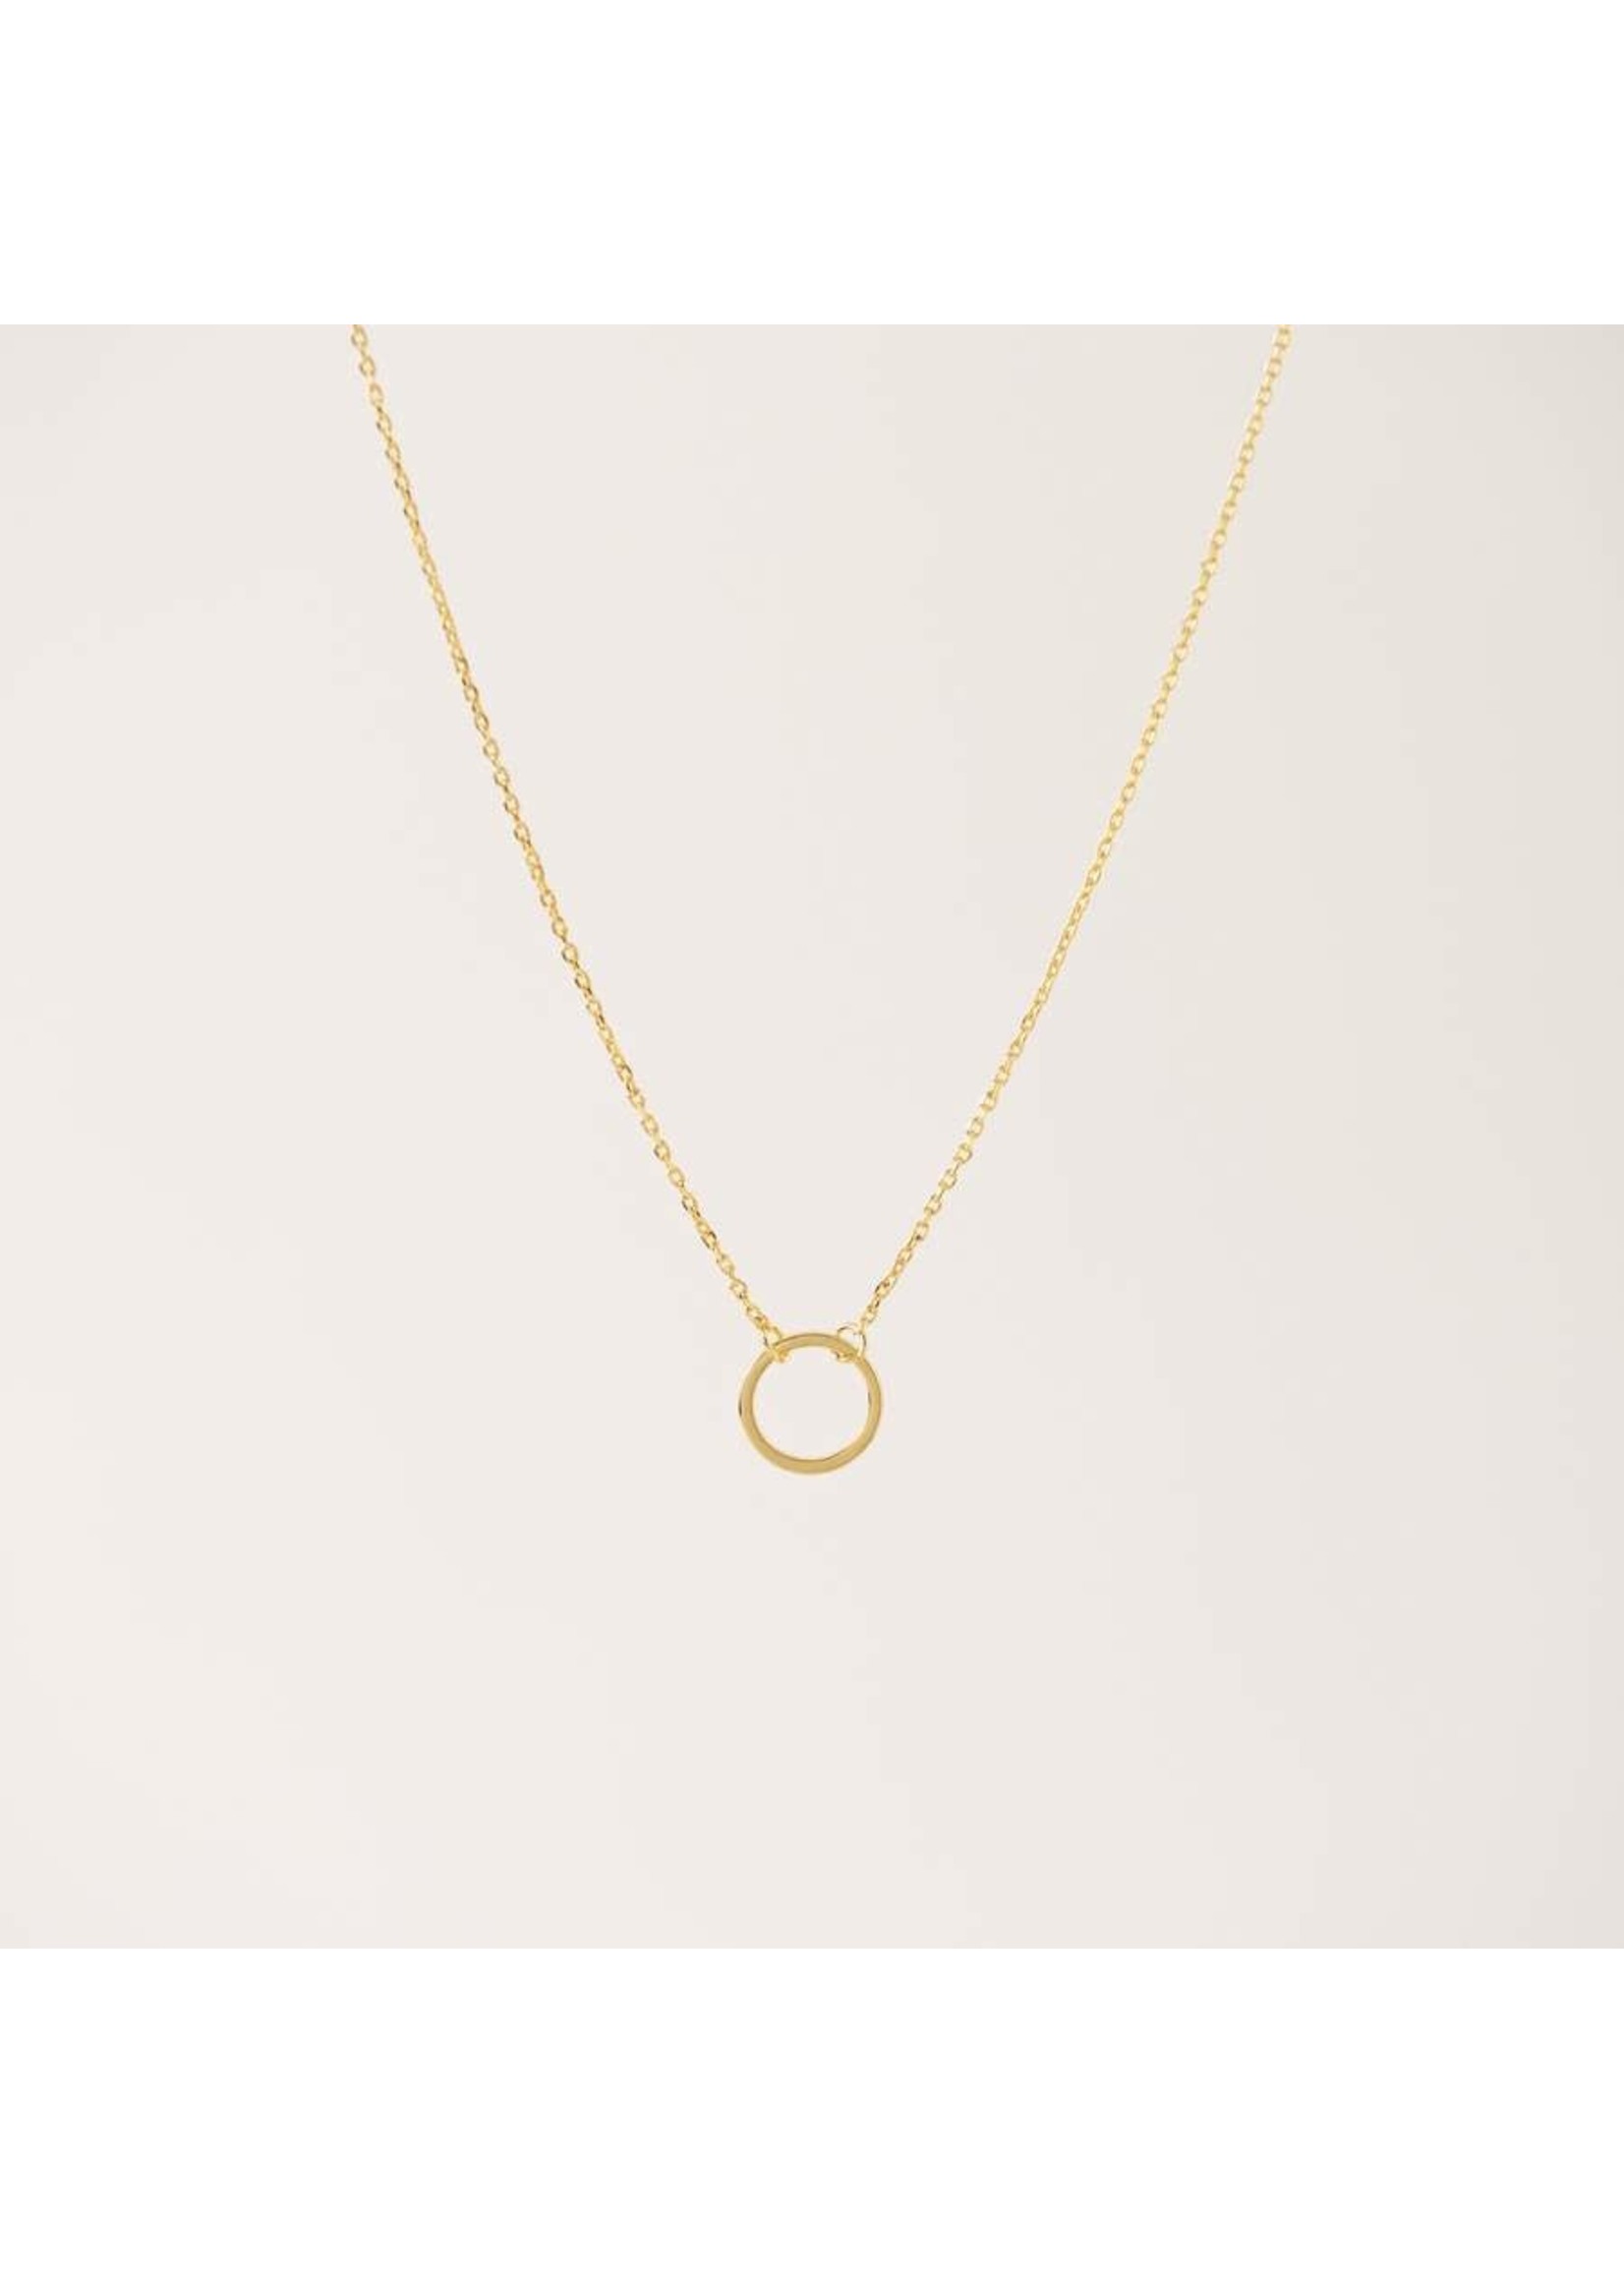 LOVER'S TEMPO SOL HOOP NECKLACE- GOLD